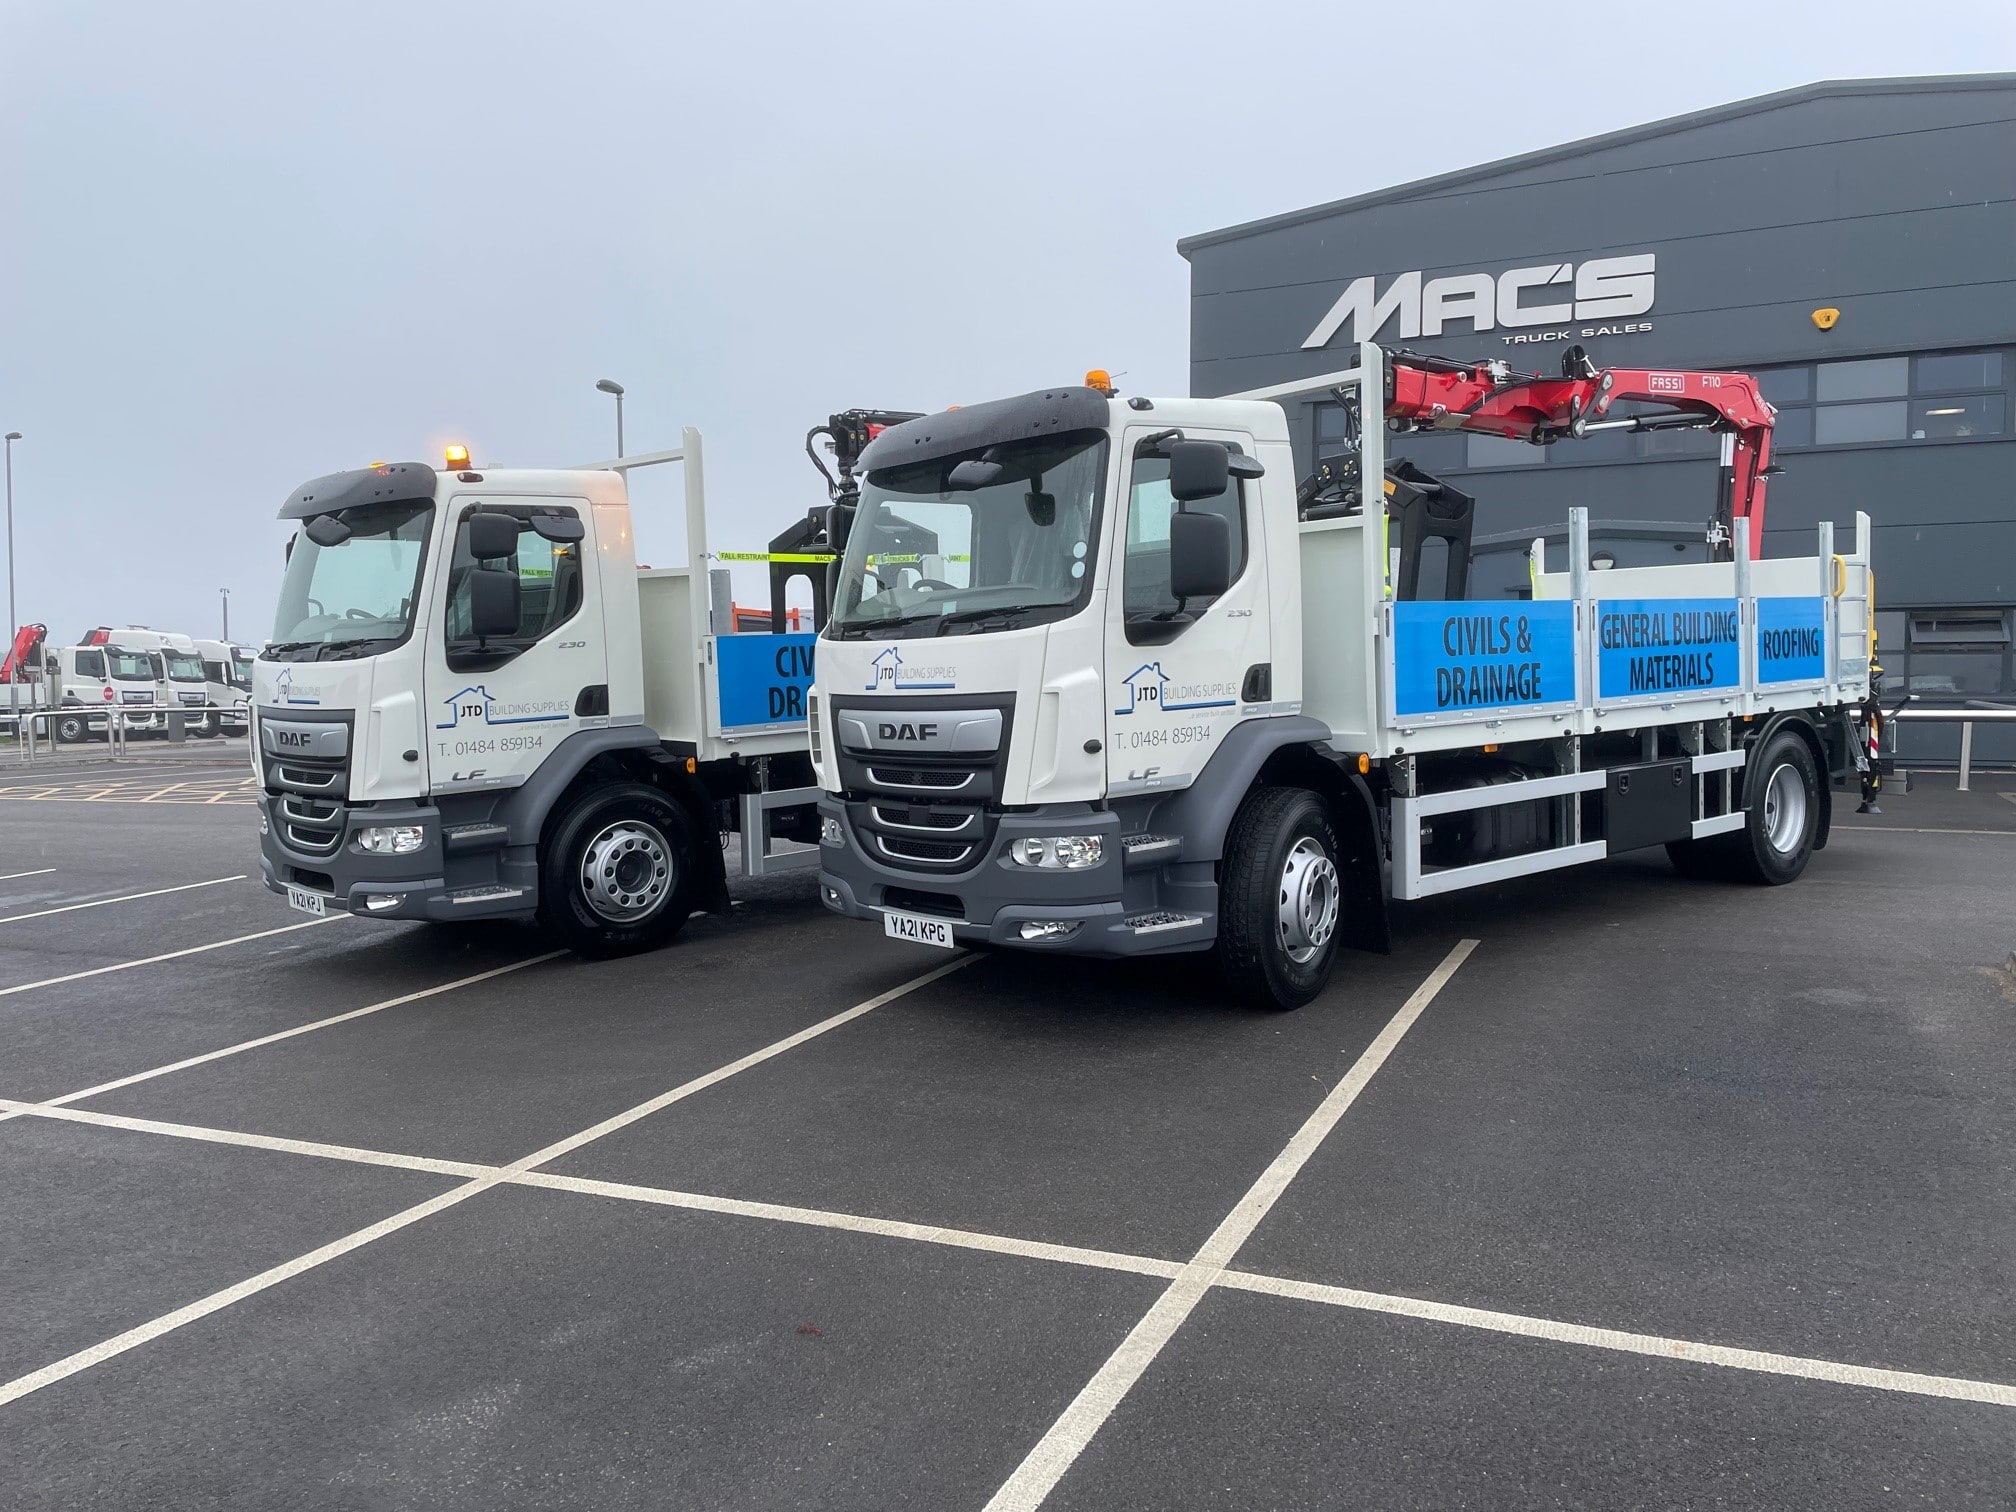 TWO DAF BUILDERS MERCHANTS FOR LOCAL COMPANY JTD